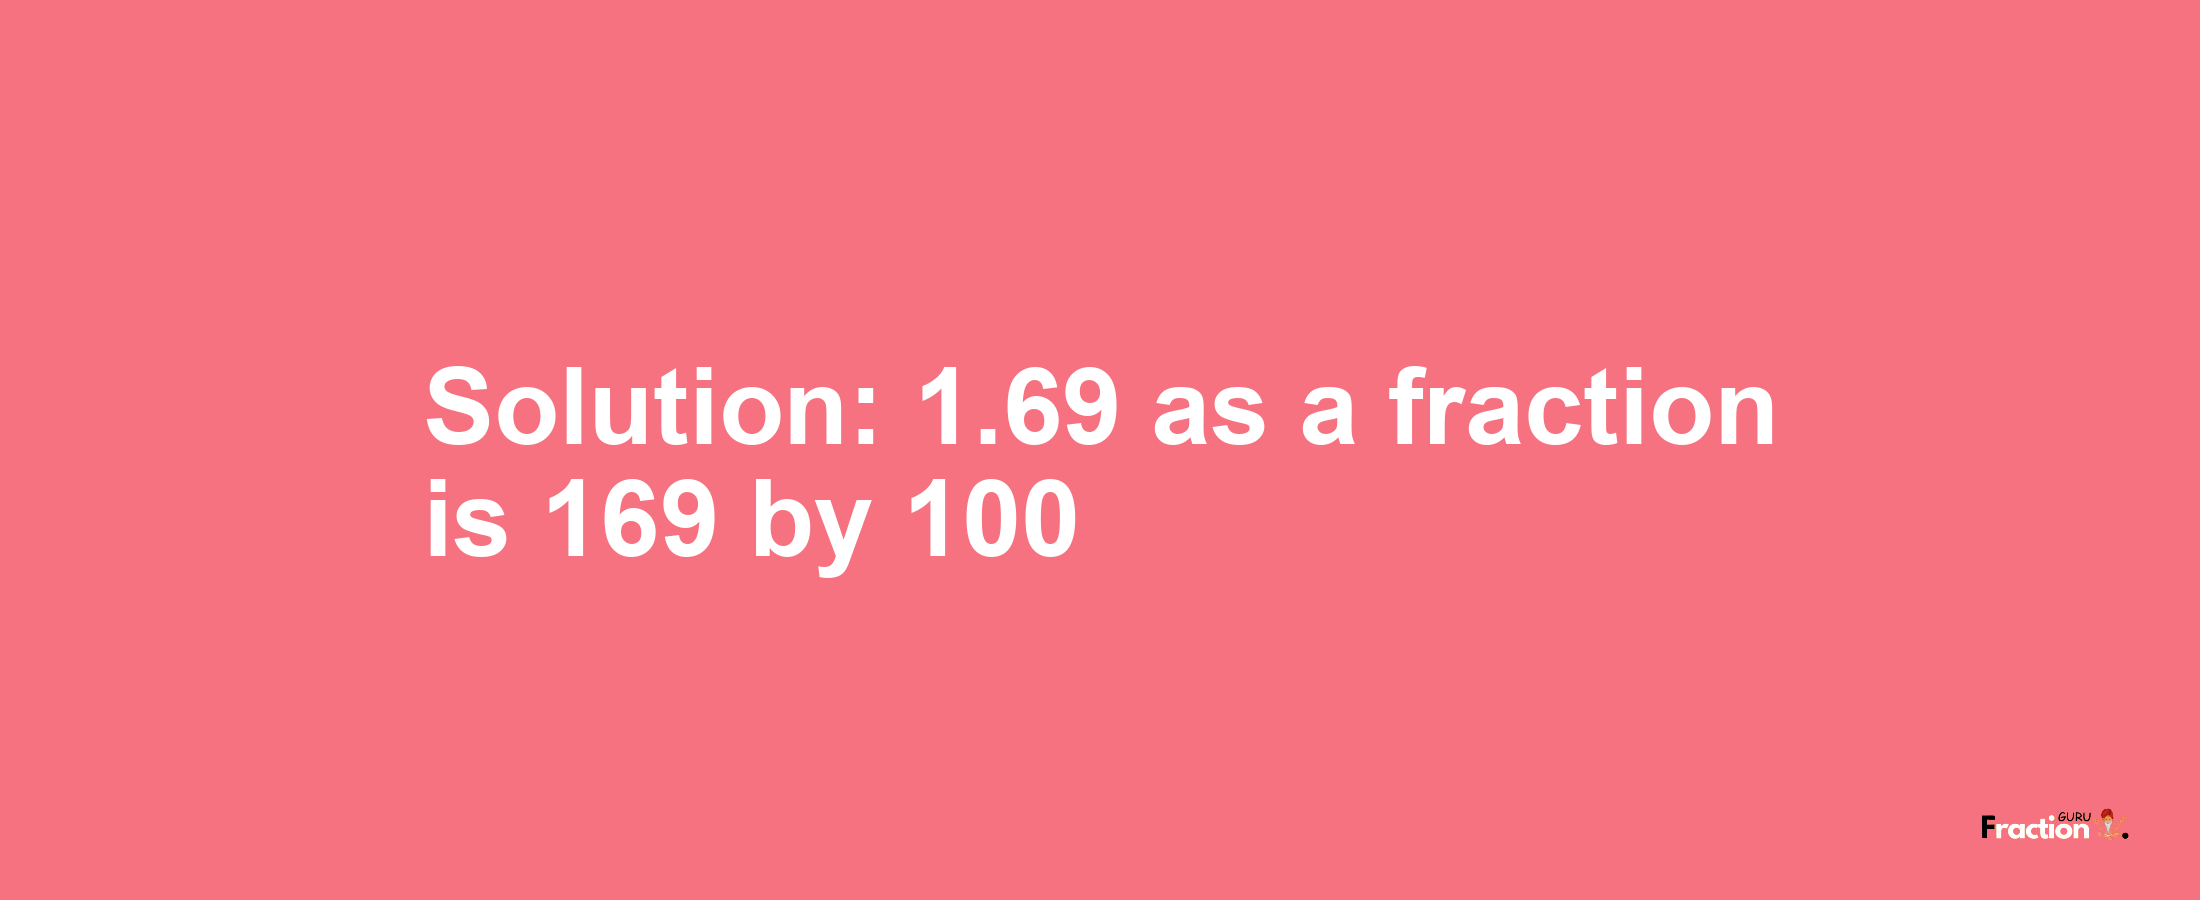 Solution:1.69 as a fraction is 169/100